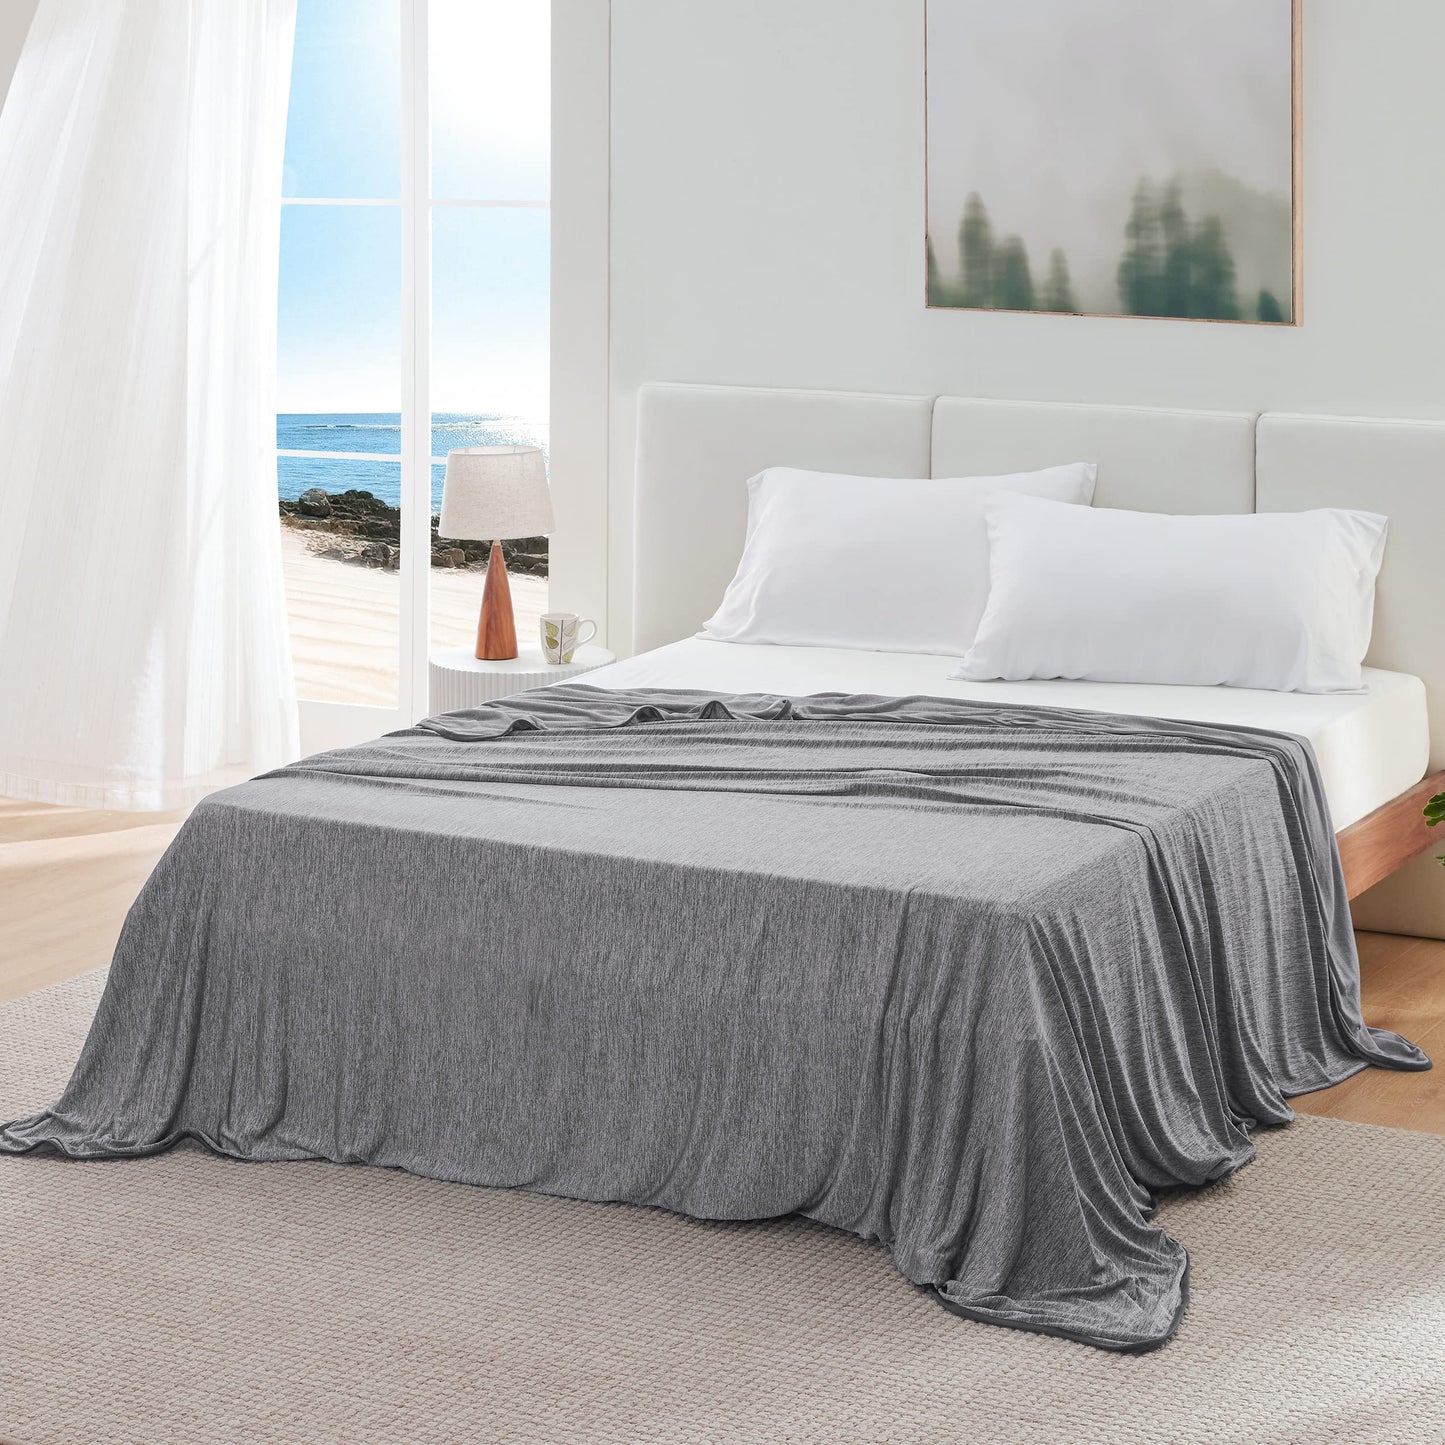 Bedsure Breescape Cooling Blanket for Hot Sleepers - Lightweight Cool Summer Blanket, Arc Chill Throw Blanket with Rayon Derived from Bamboo, Cold Ice Blankets for Night Sweats, 50×70, Dark Grey